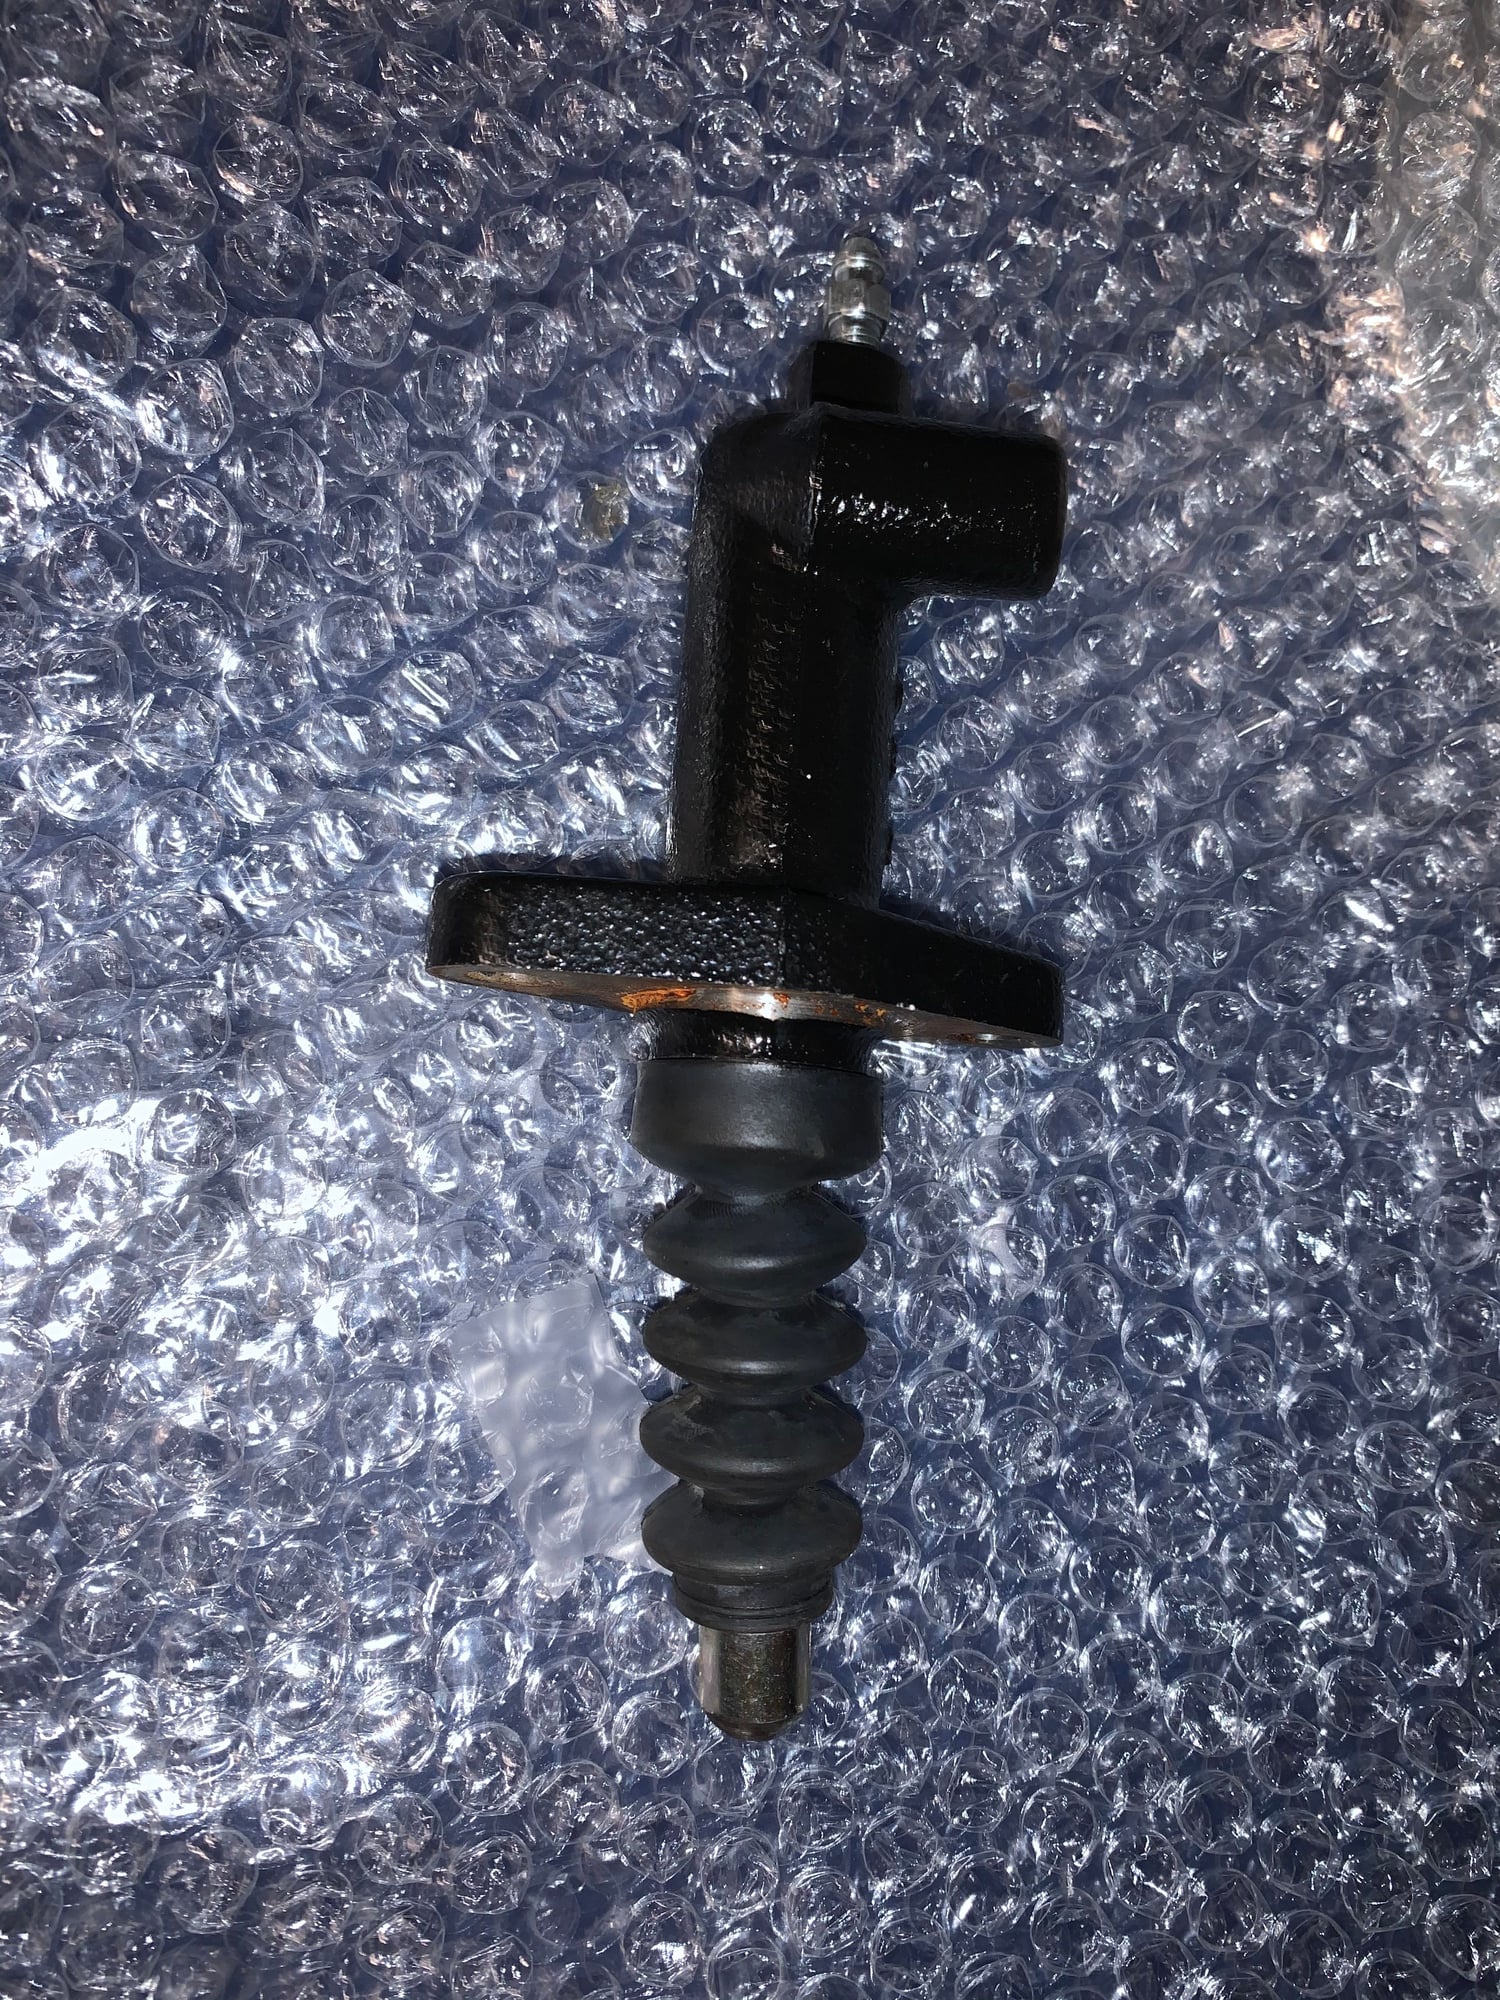 Drivetrain - FD Clutch Fork & Slave Cylinder - New - All Years Any Make All Models - Van Nuys, CA 91406, United States